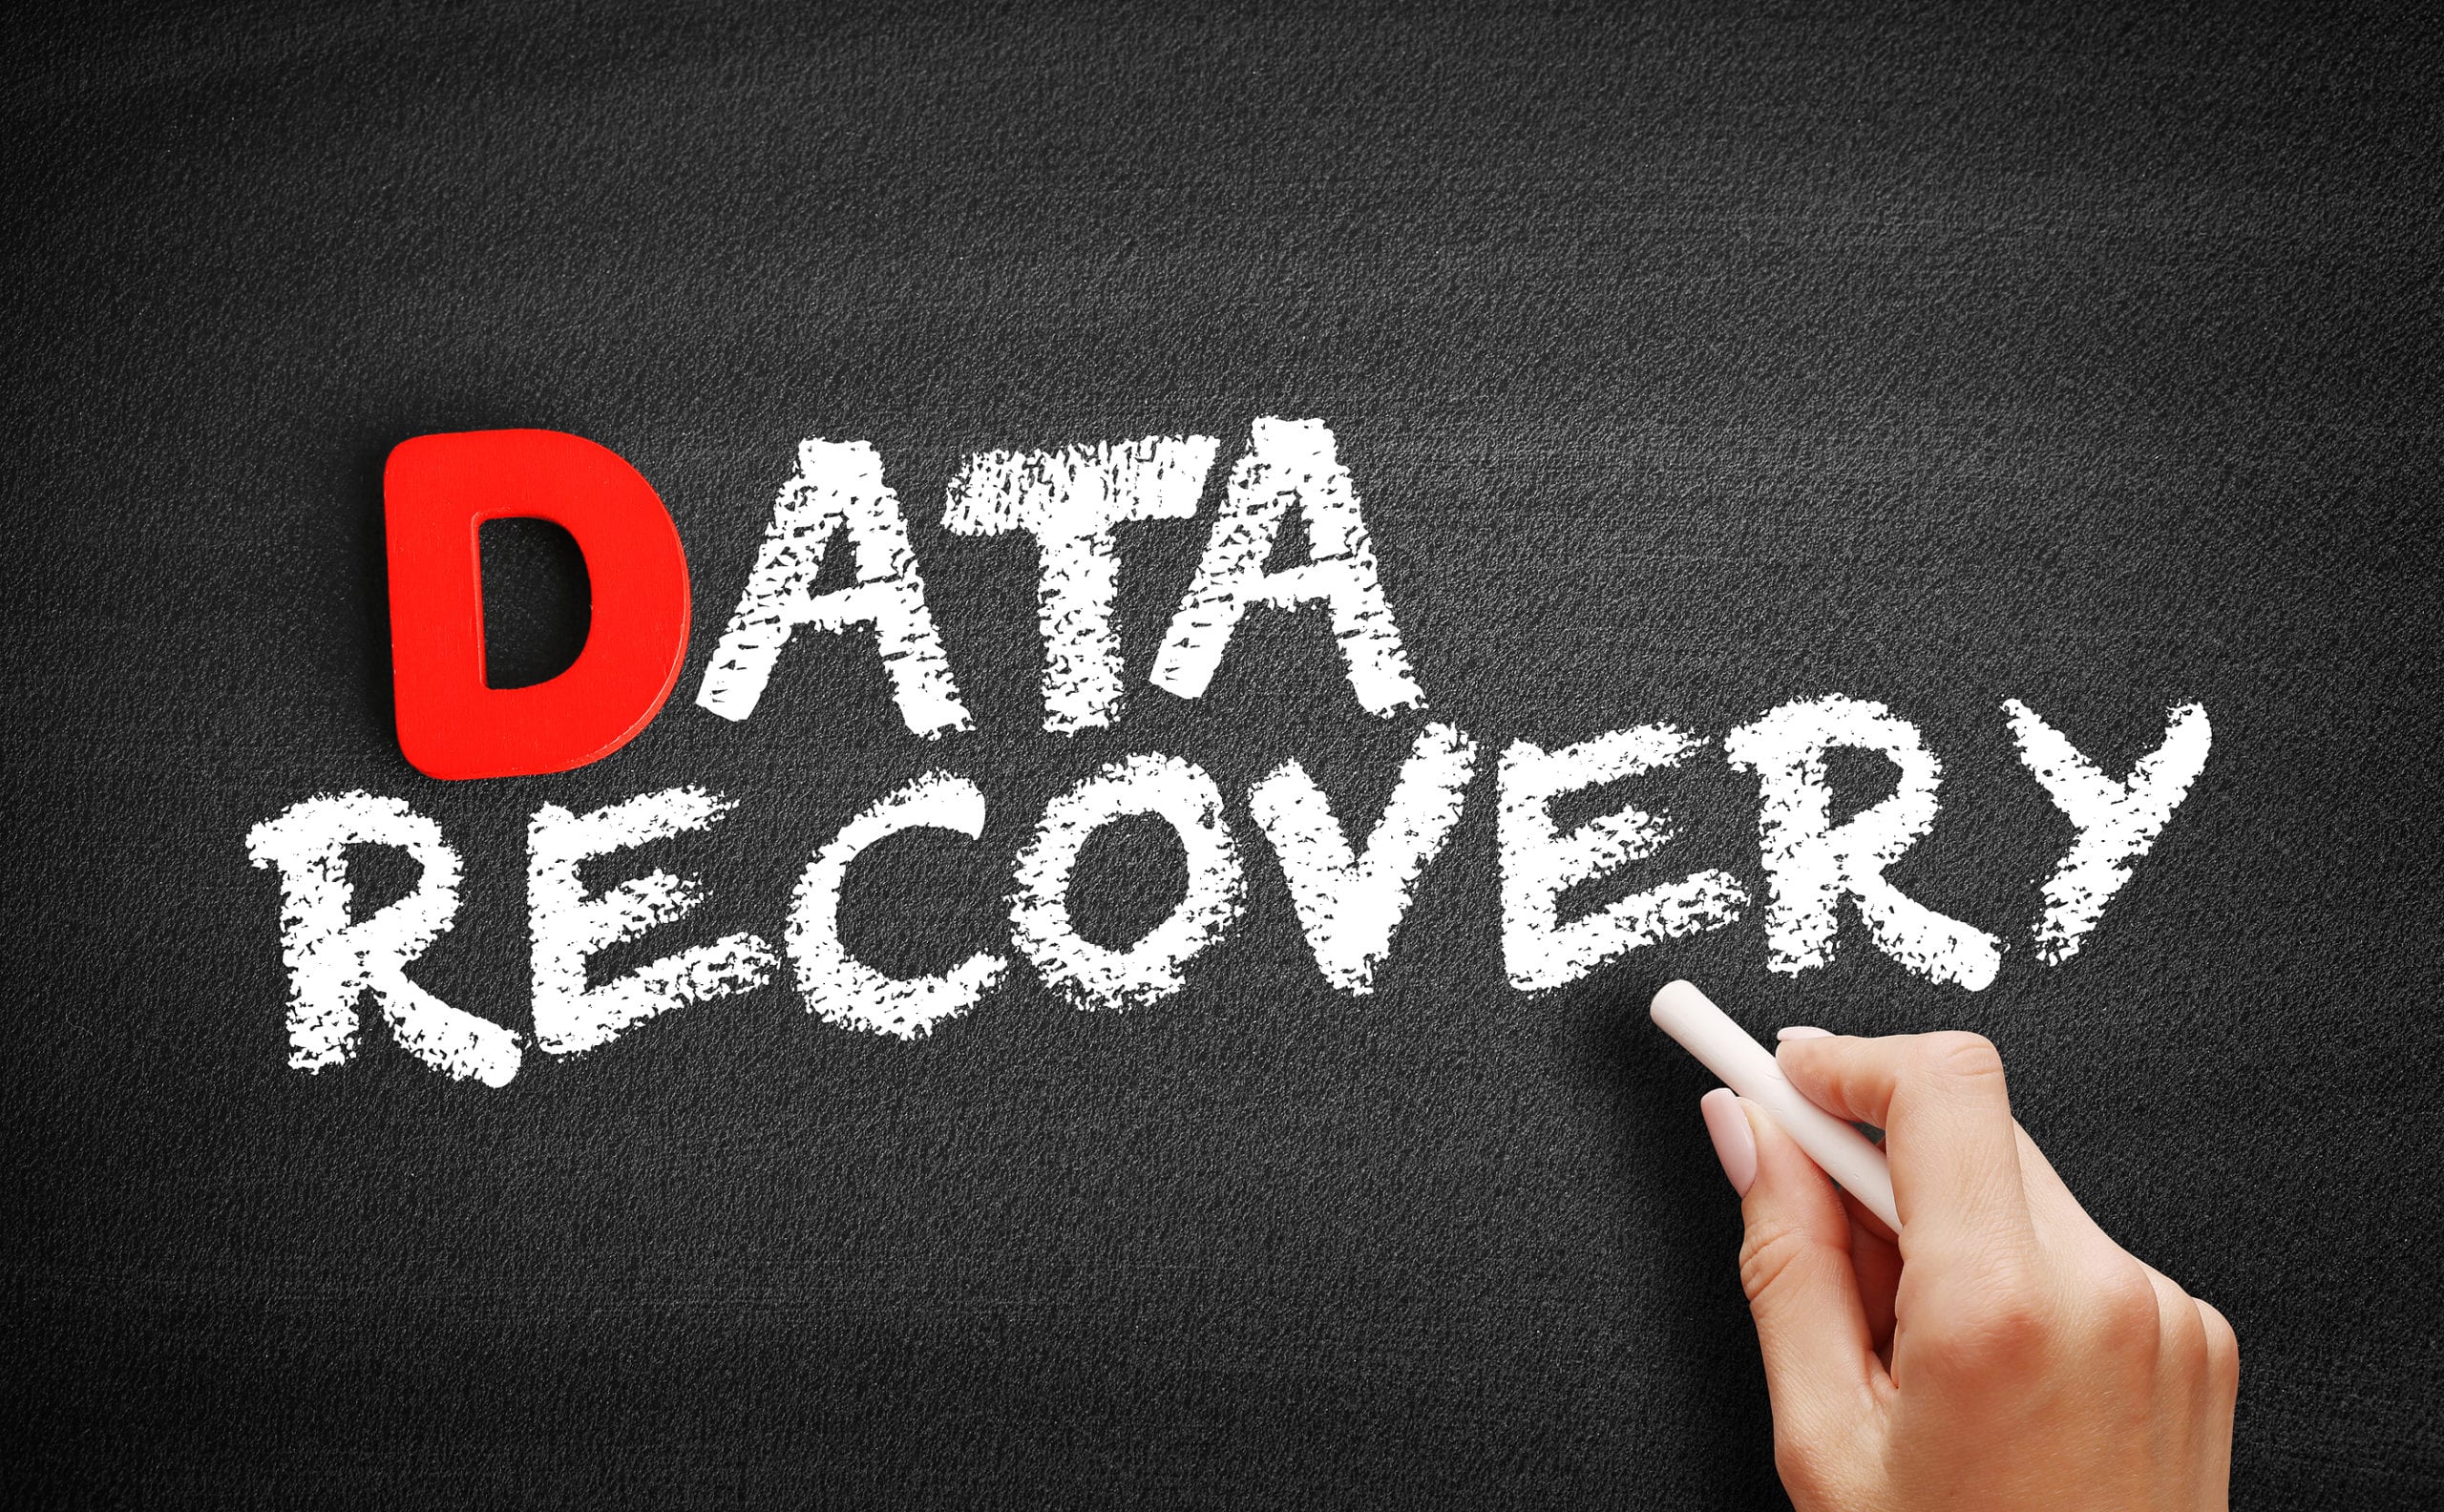 How to Recover Data From a USB Hard Drive